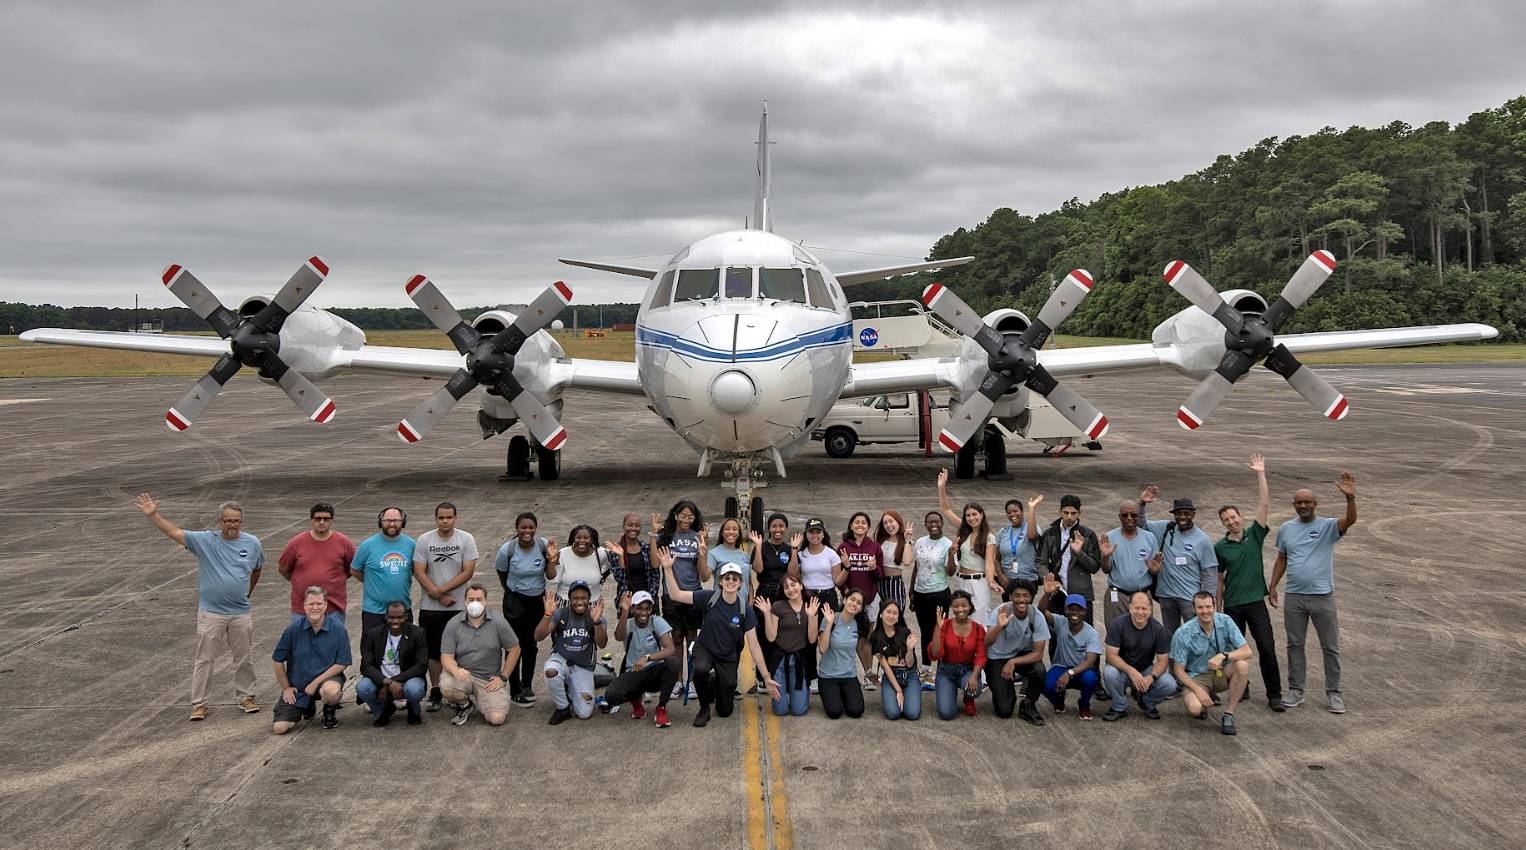 The SaSa class of 2022 poses in front of an aircraft, together with graduate mentors and instructors.